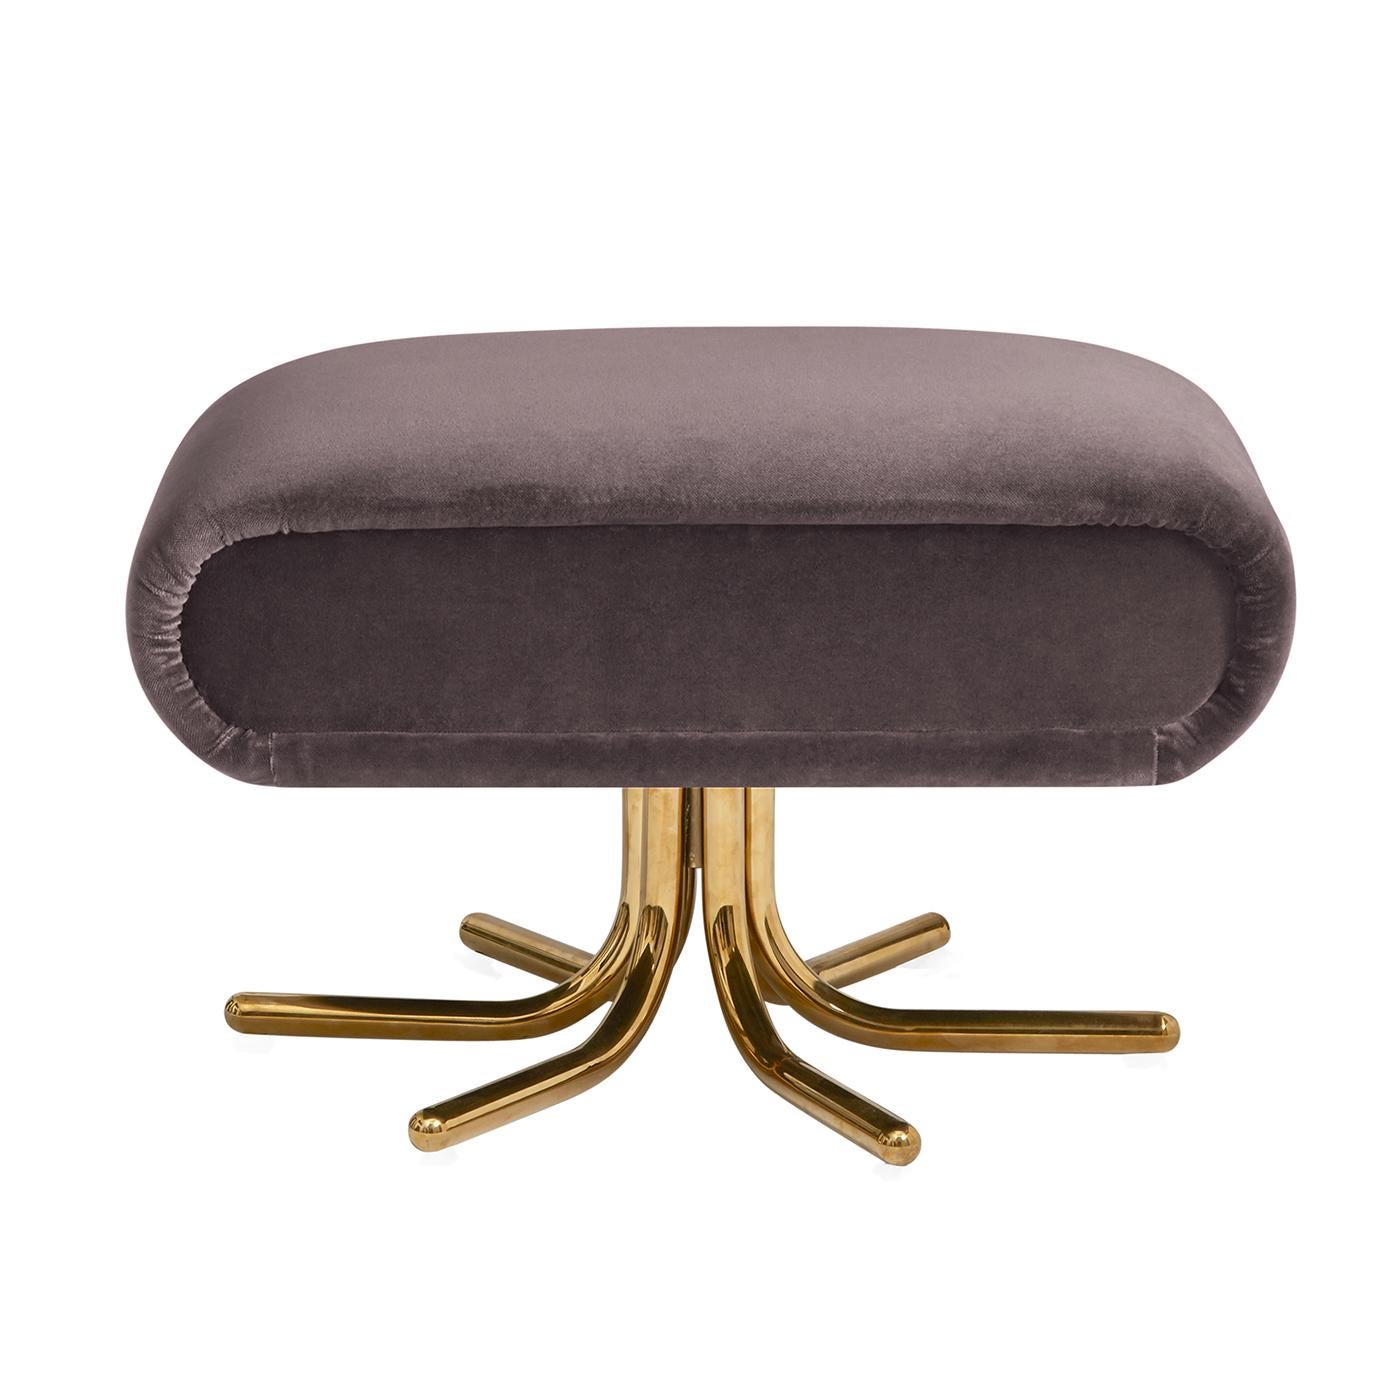 Futuristic glamour. Perched atop polished brass lozenge shaped legs, moody charcoal velvet gives our ultra lounge ottoman a deeply glamorous touch. With a nod to Italian modernism and a hint of Space Age futurism, it's timelessly chic with a smooth